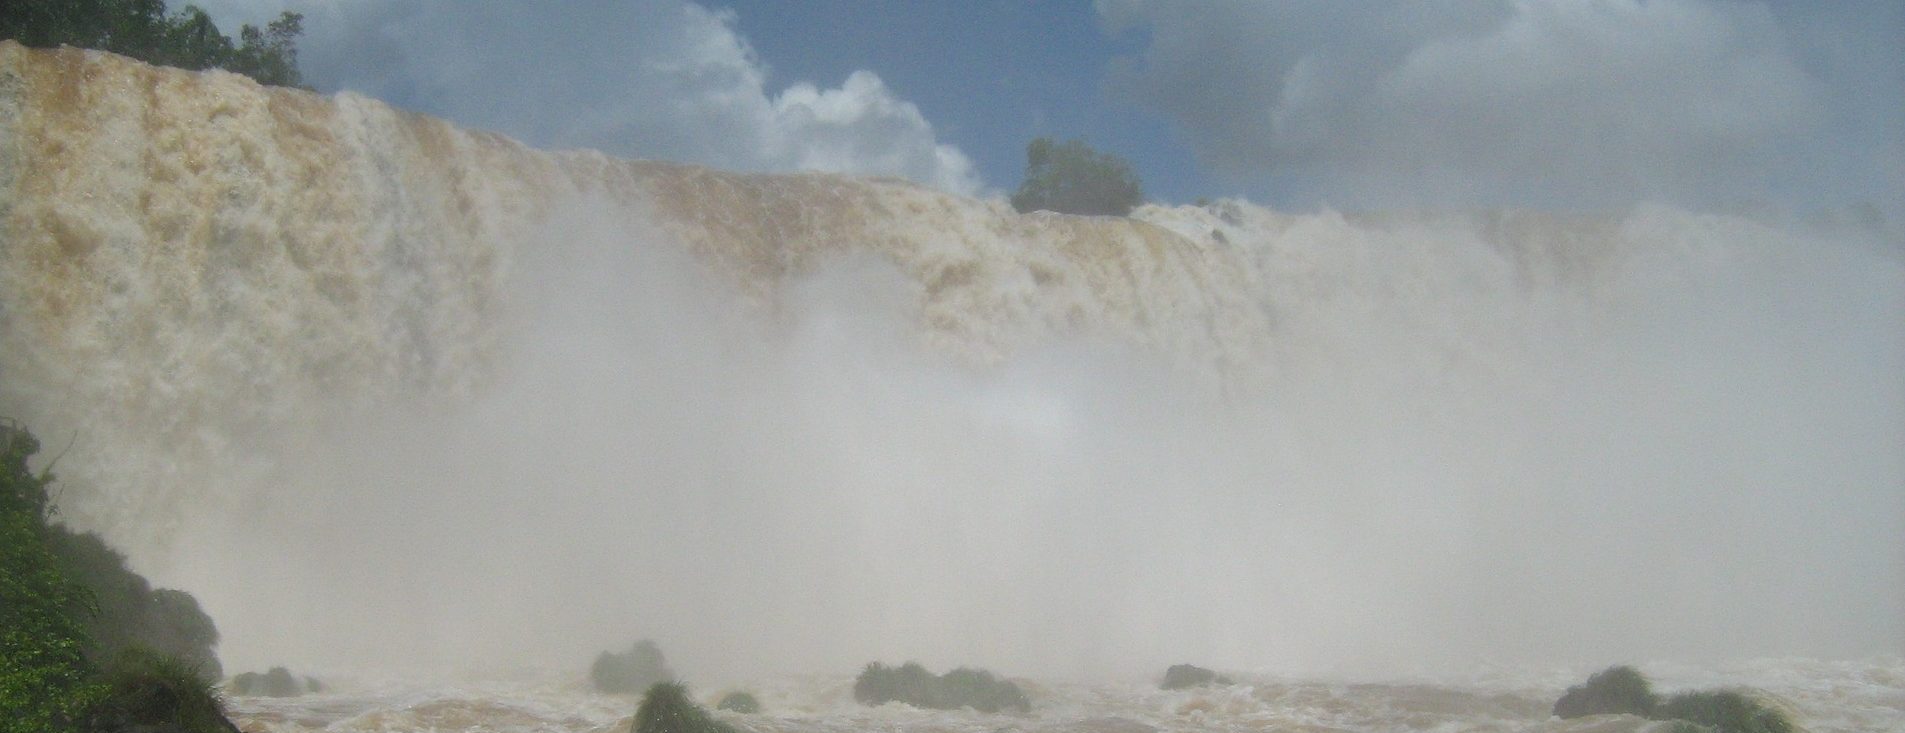 A wall of white water at the Iguazu falls. 